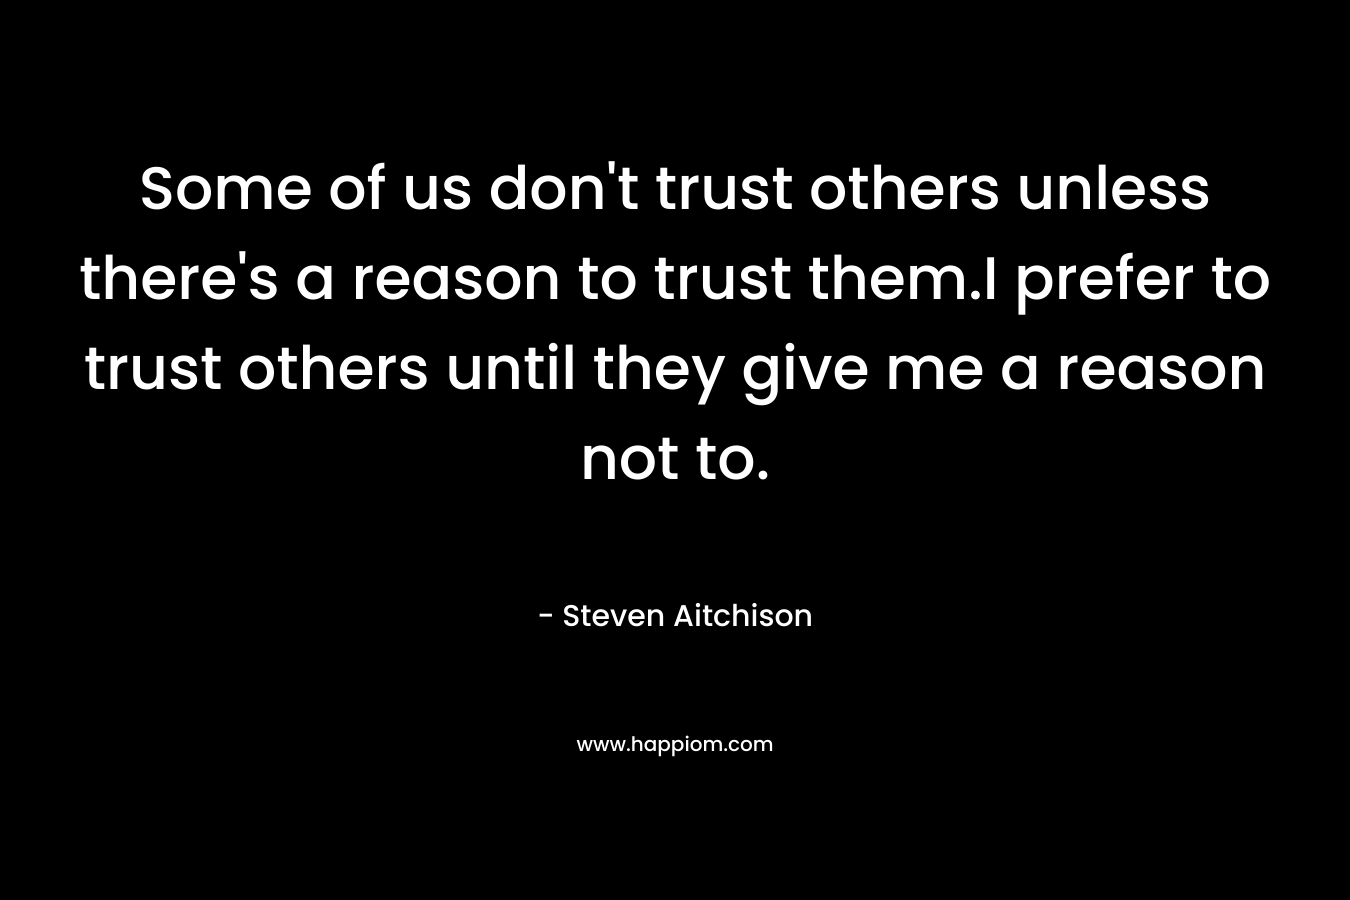 Some of us don't trust others unless there's a reason to trust them.I prefer to trust others until they give me a reason not to.